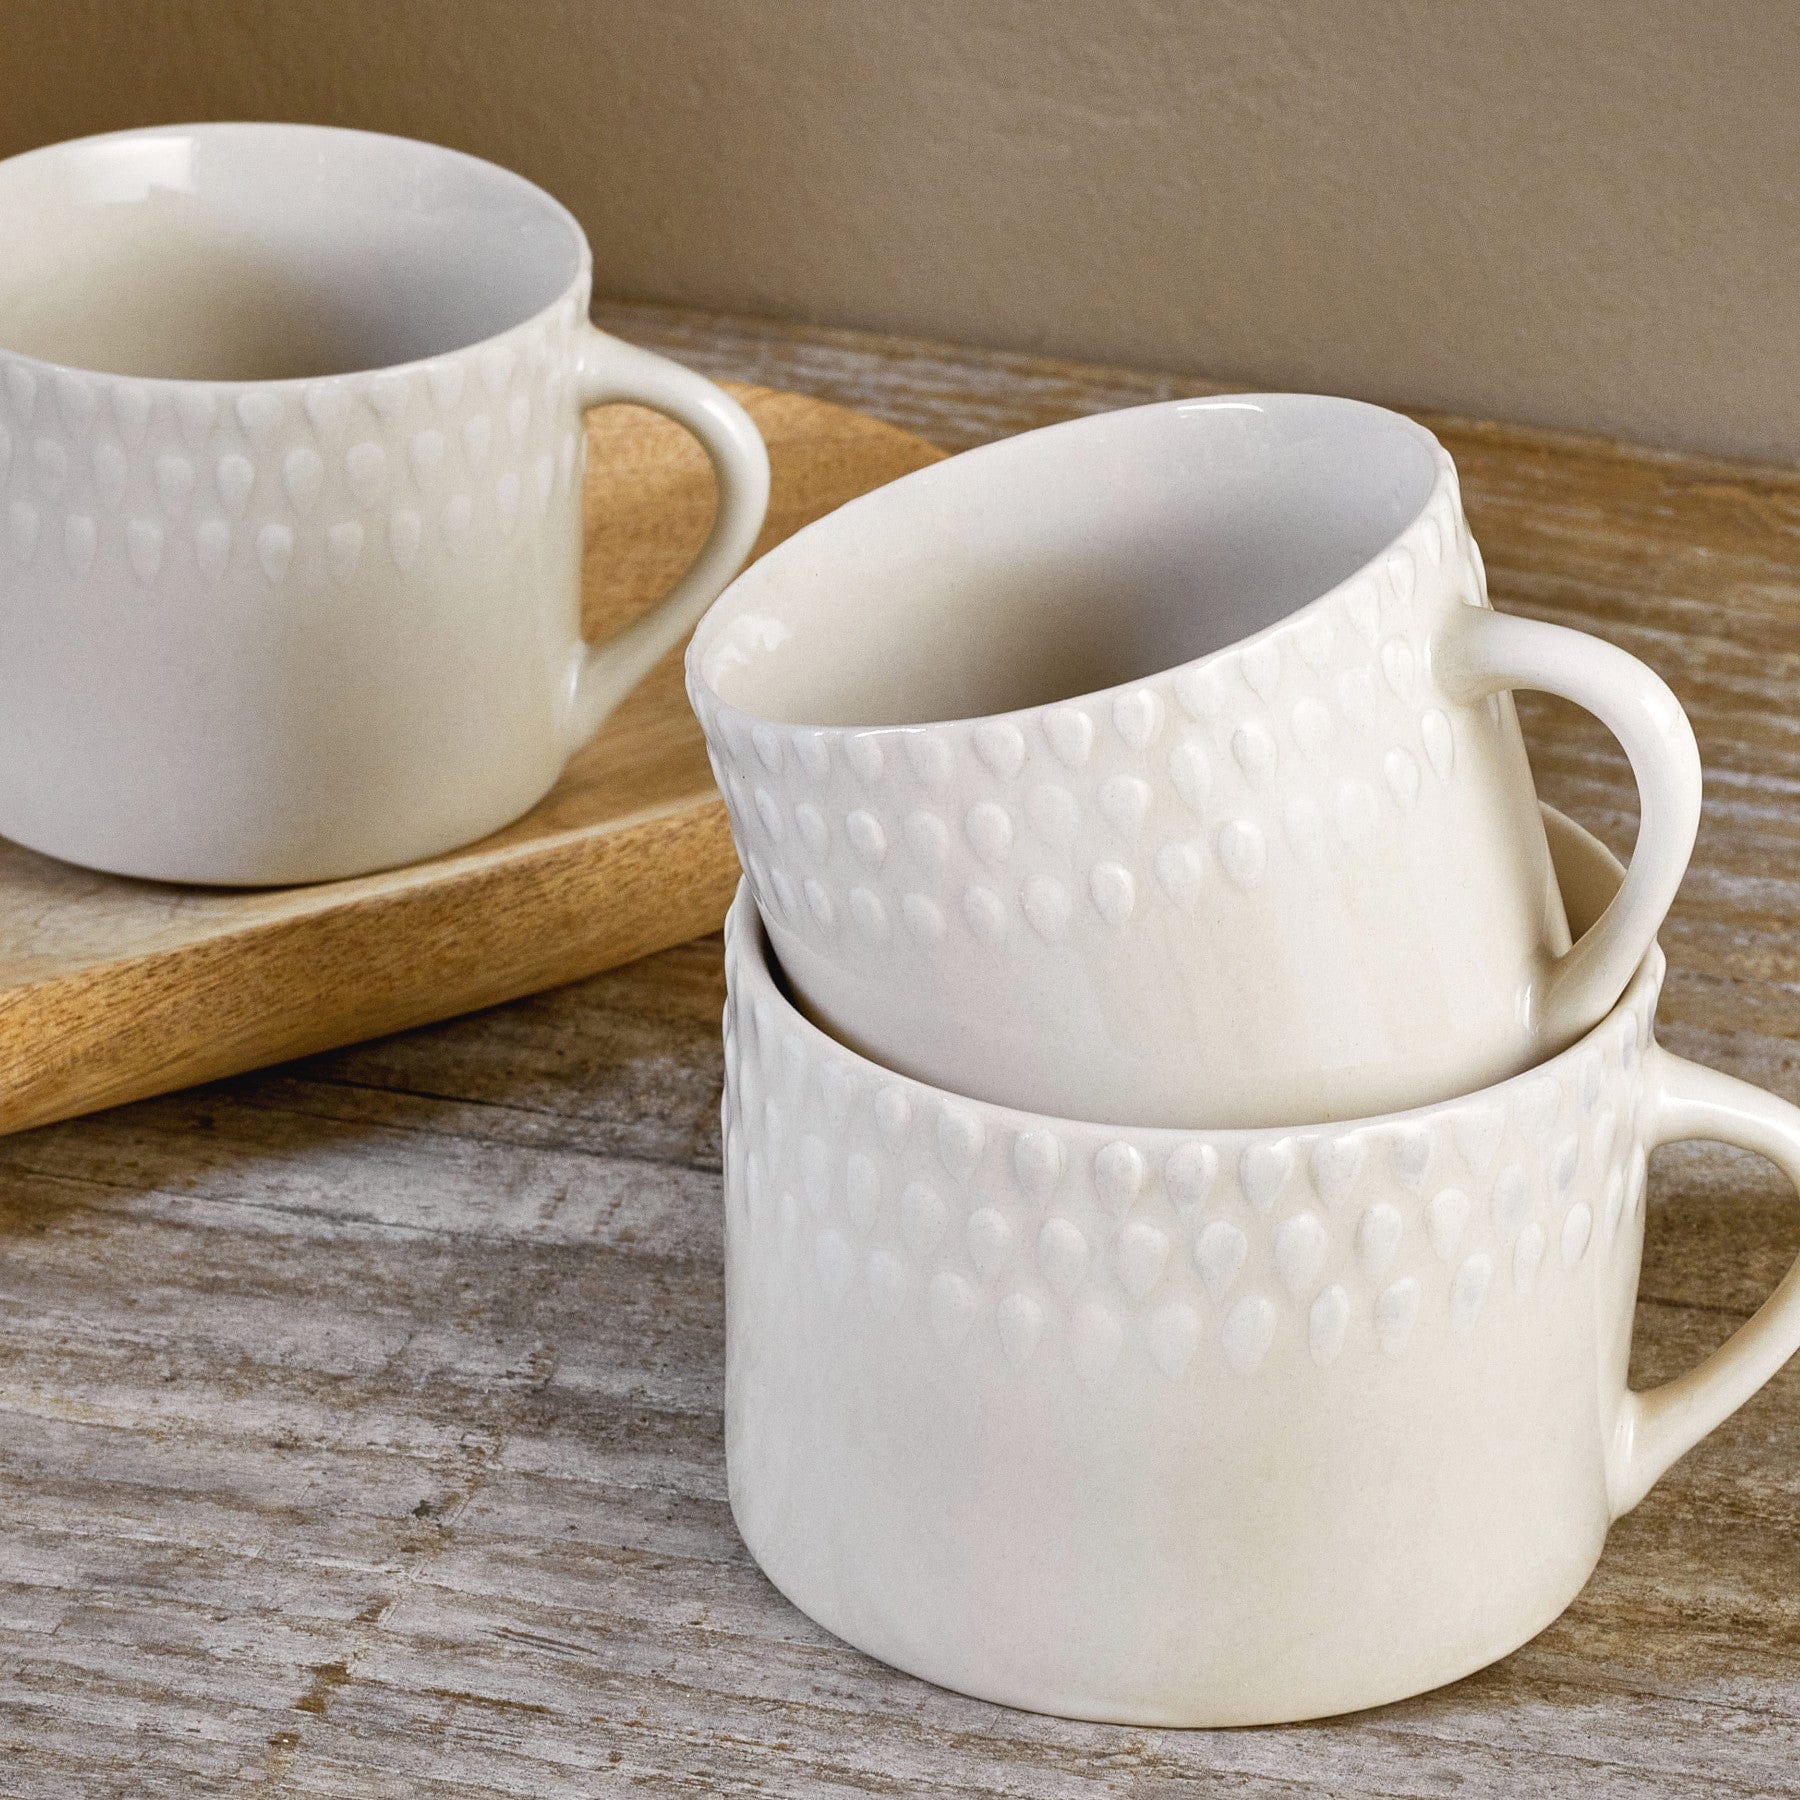 Three white textured ceramic coffee mugs stacked on a wooden surface with a wooden spoon in the background.